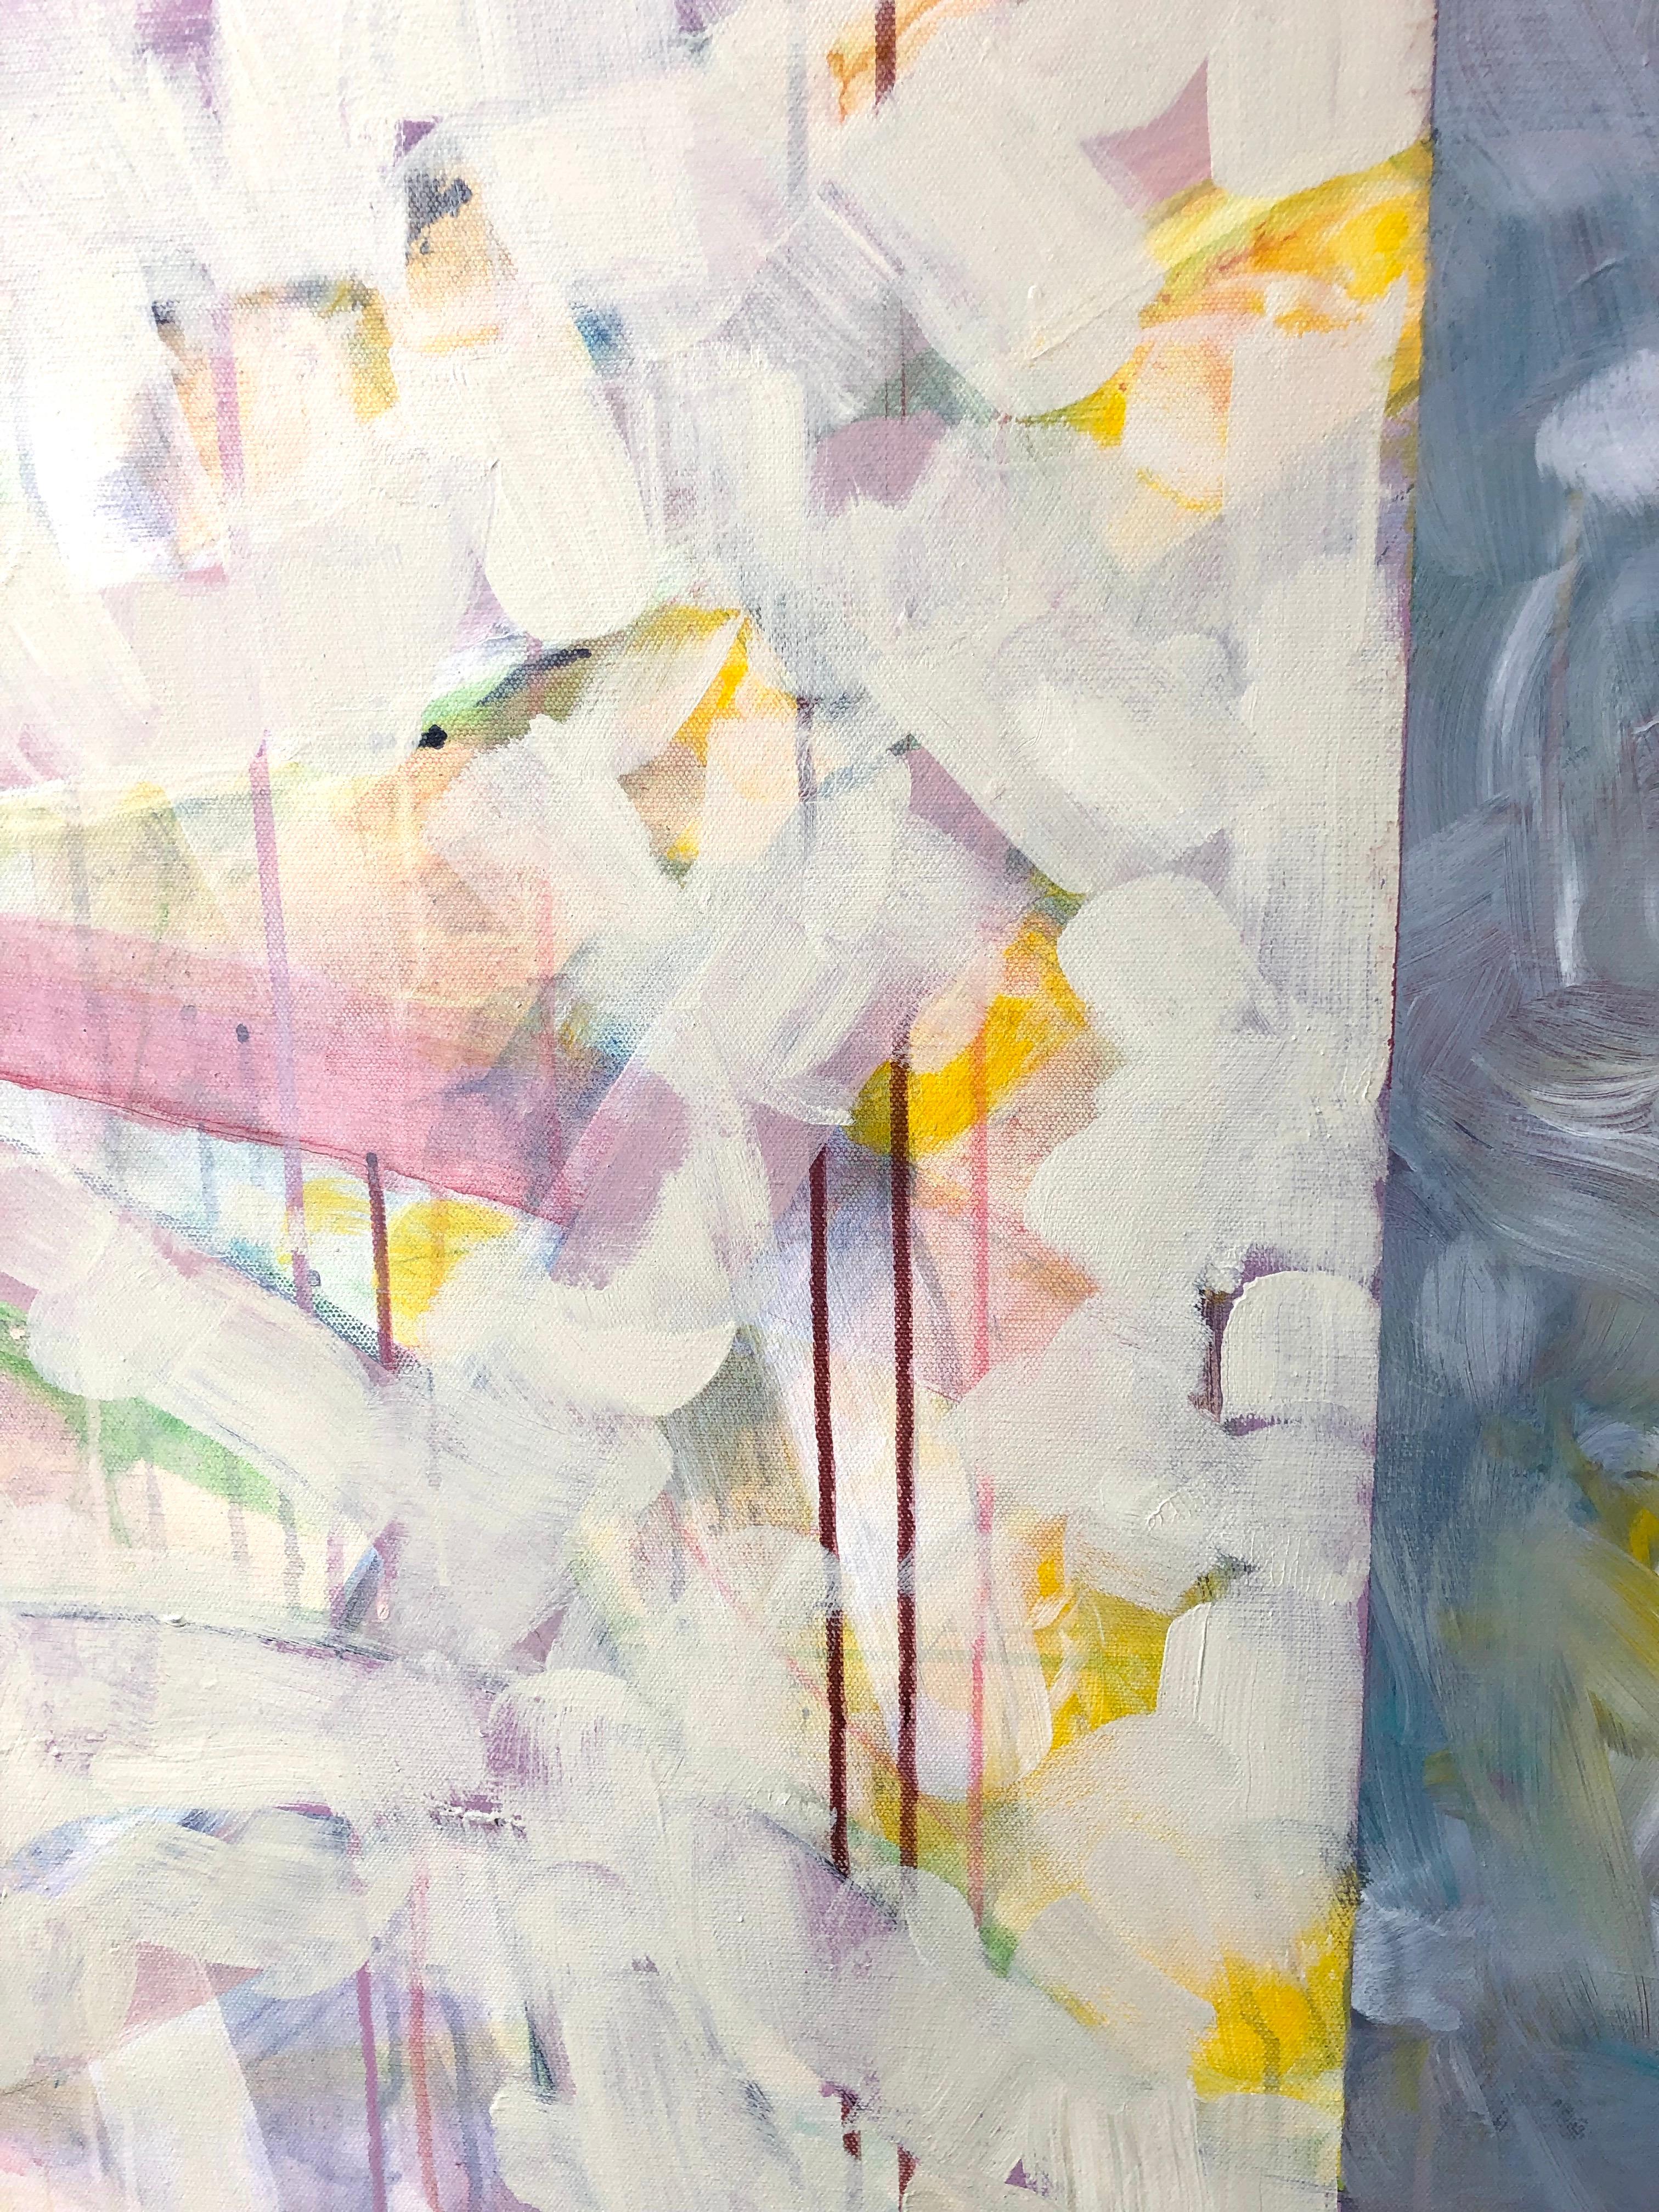 Parallel Universes: large contemporary abstract painting w/ gray, white & pink - Painting by Joseph McAleer